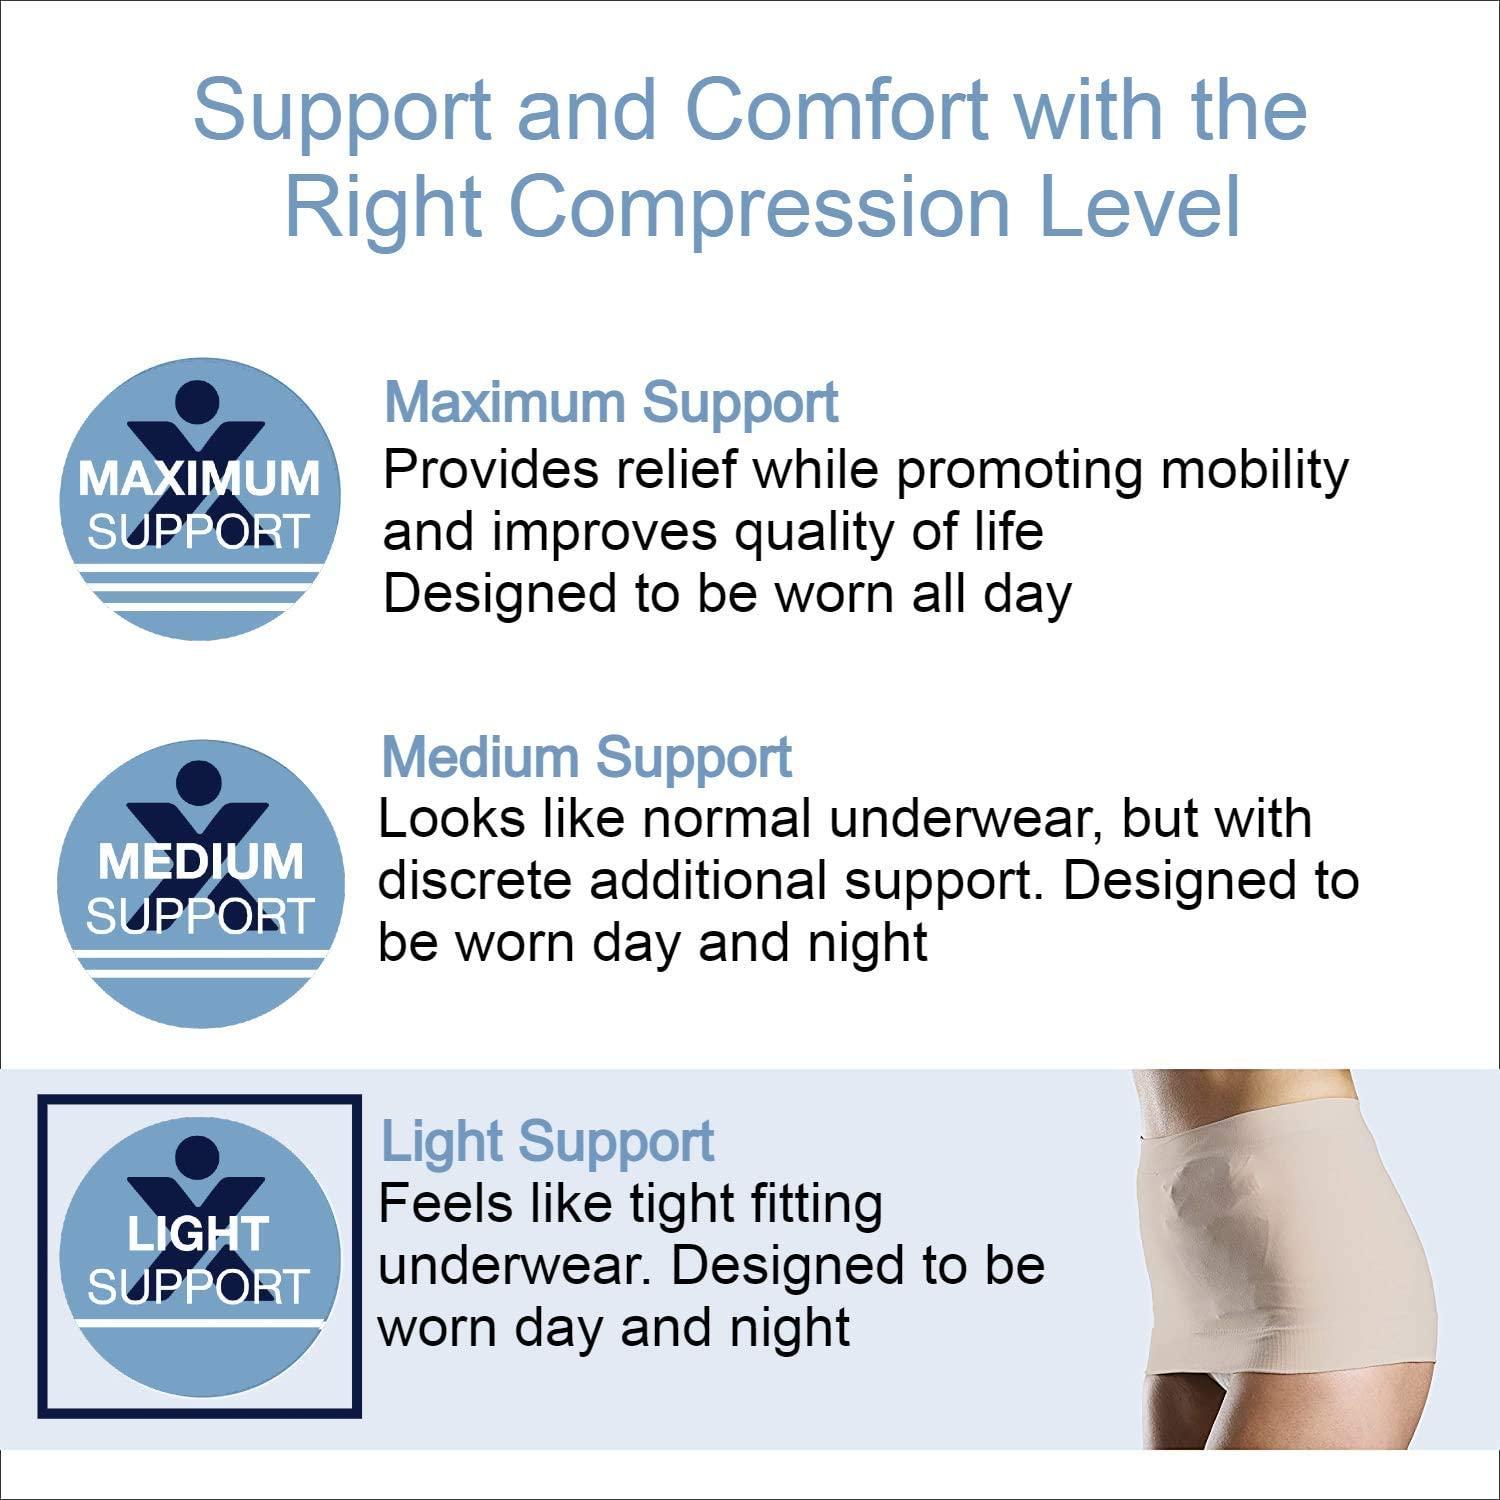 Corsinel StomaSafe Plus Ostomy/Hernia Support Garment Light 3216 by TYTEX  (Beige, S/M) 33.5 - 44 Hip Circumference Beige Small/Medium (Pack of 1)